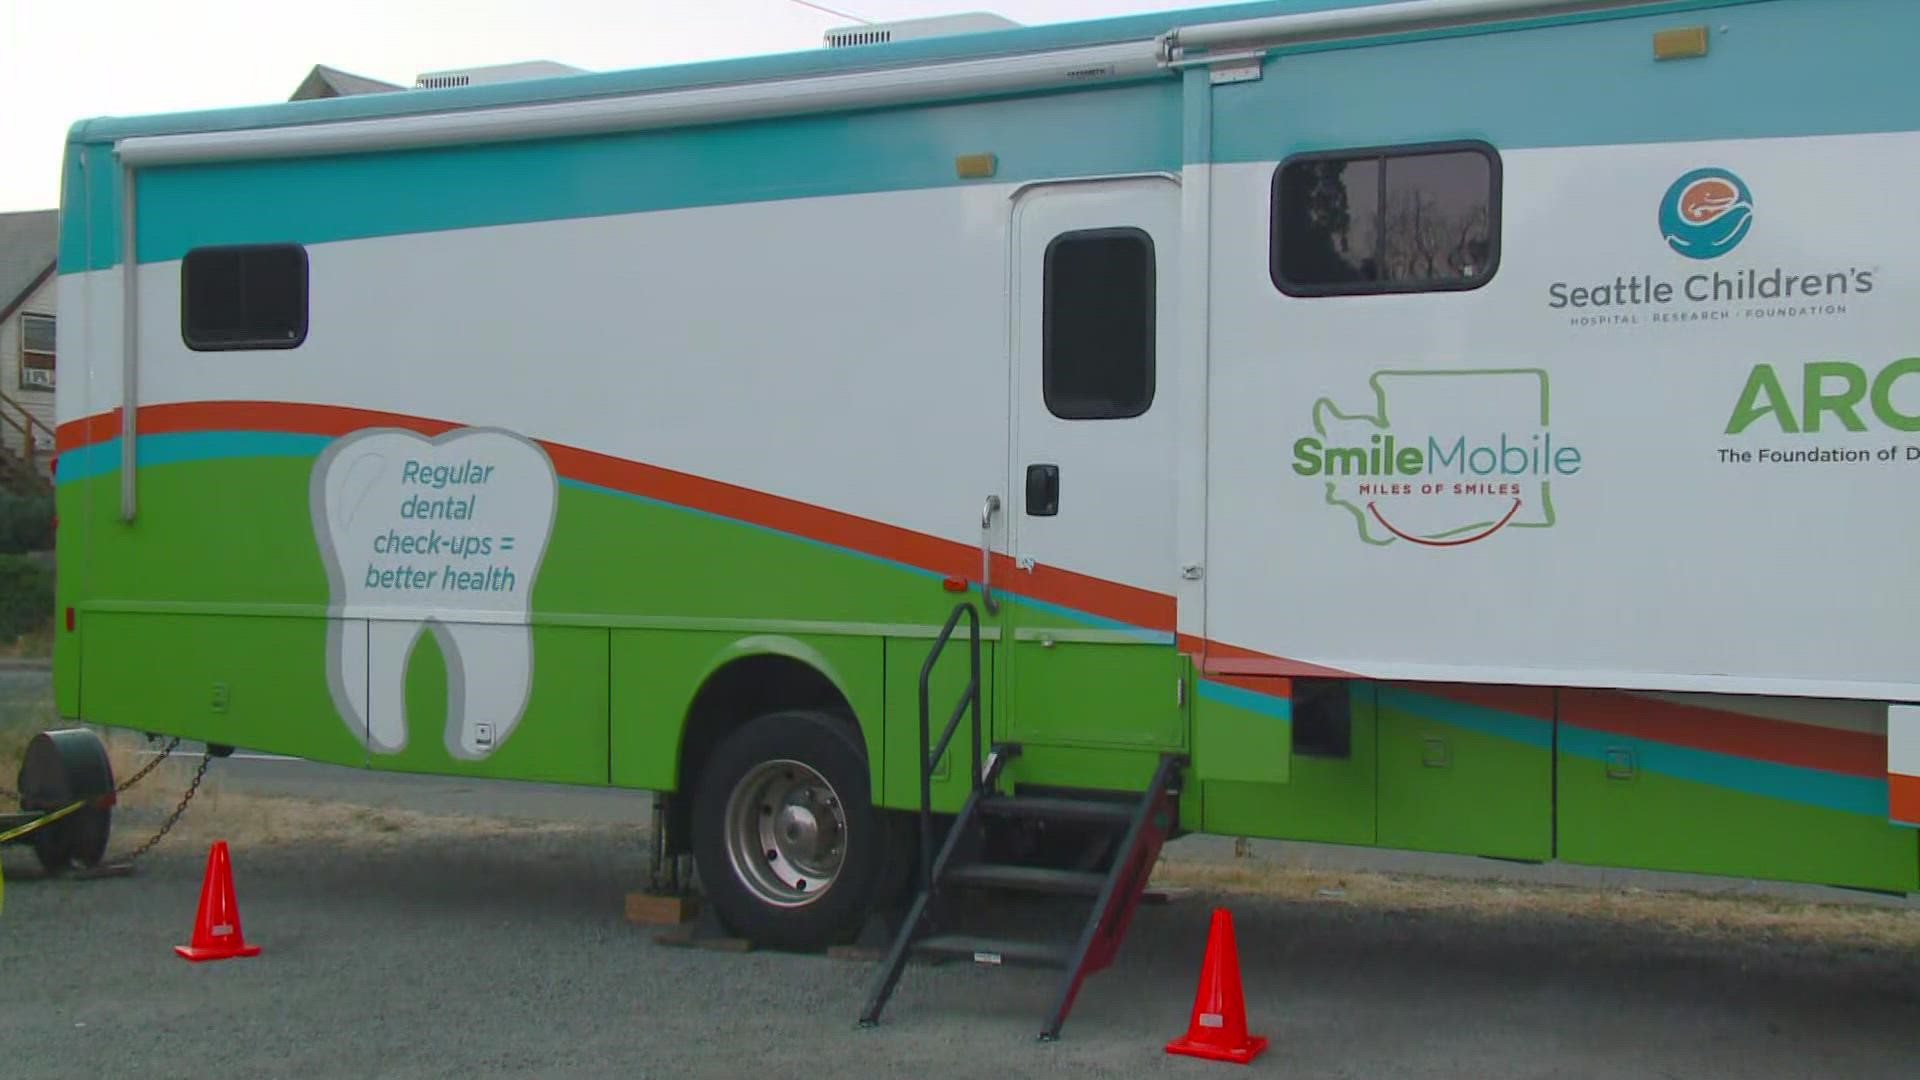 Free SmileMobile appointments are available from Sept. 20-23, from 10 a.m. to 5 p.m.